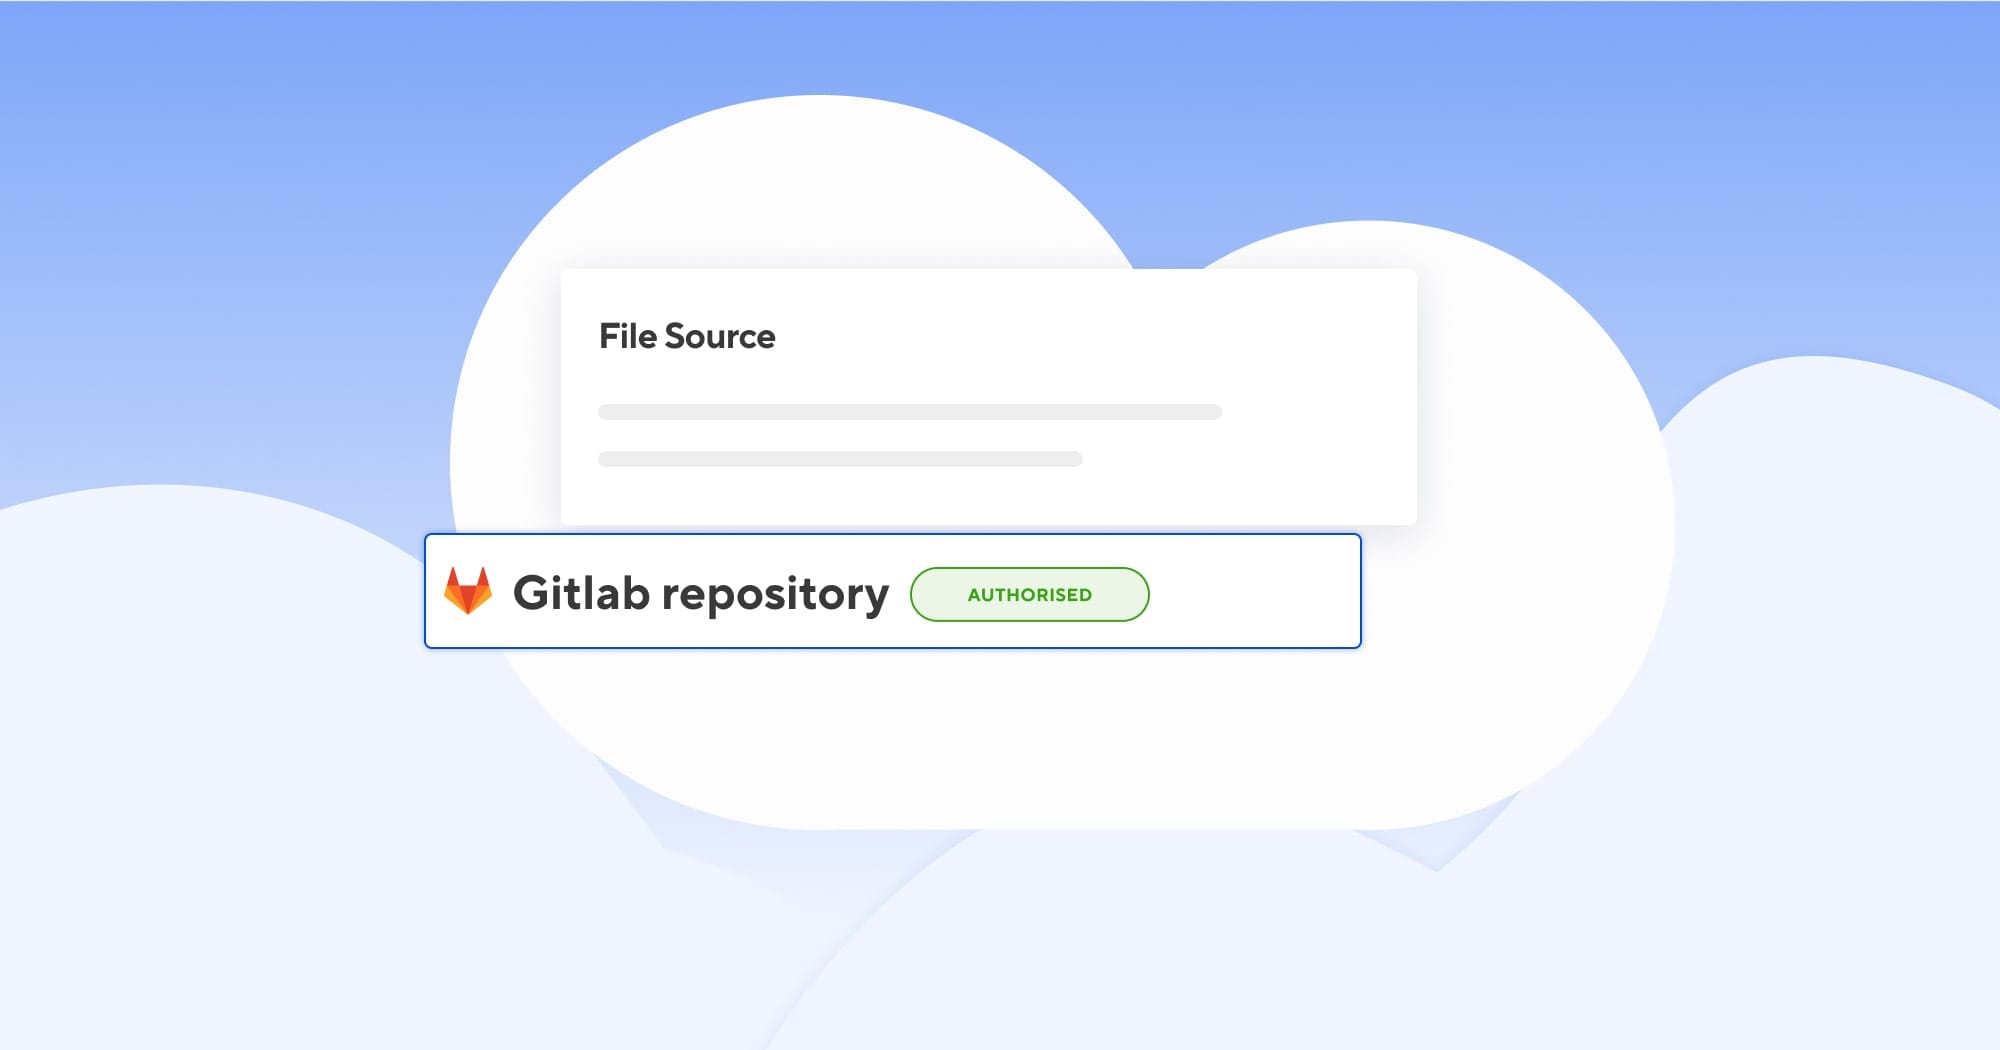 Graphic showing a user choosing a Gitlab repository.